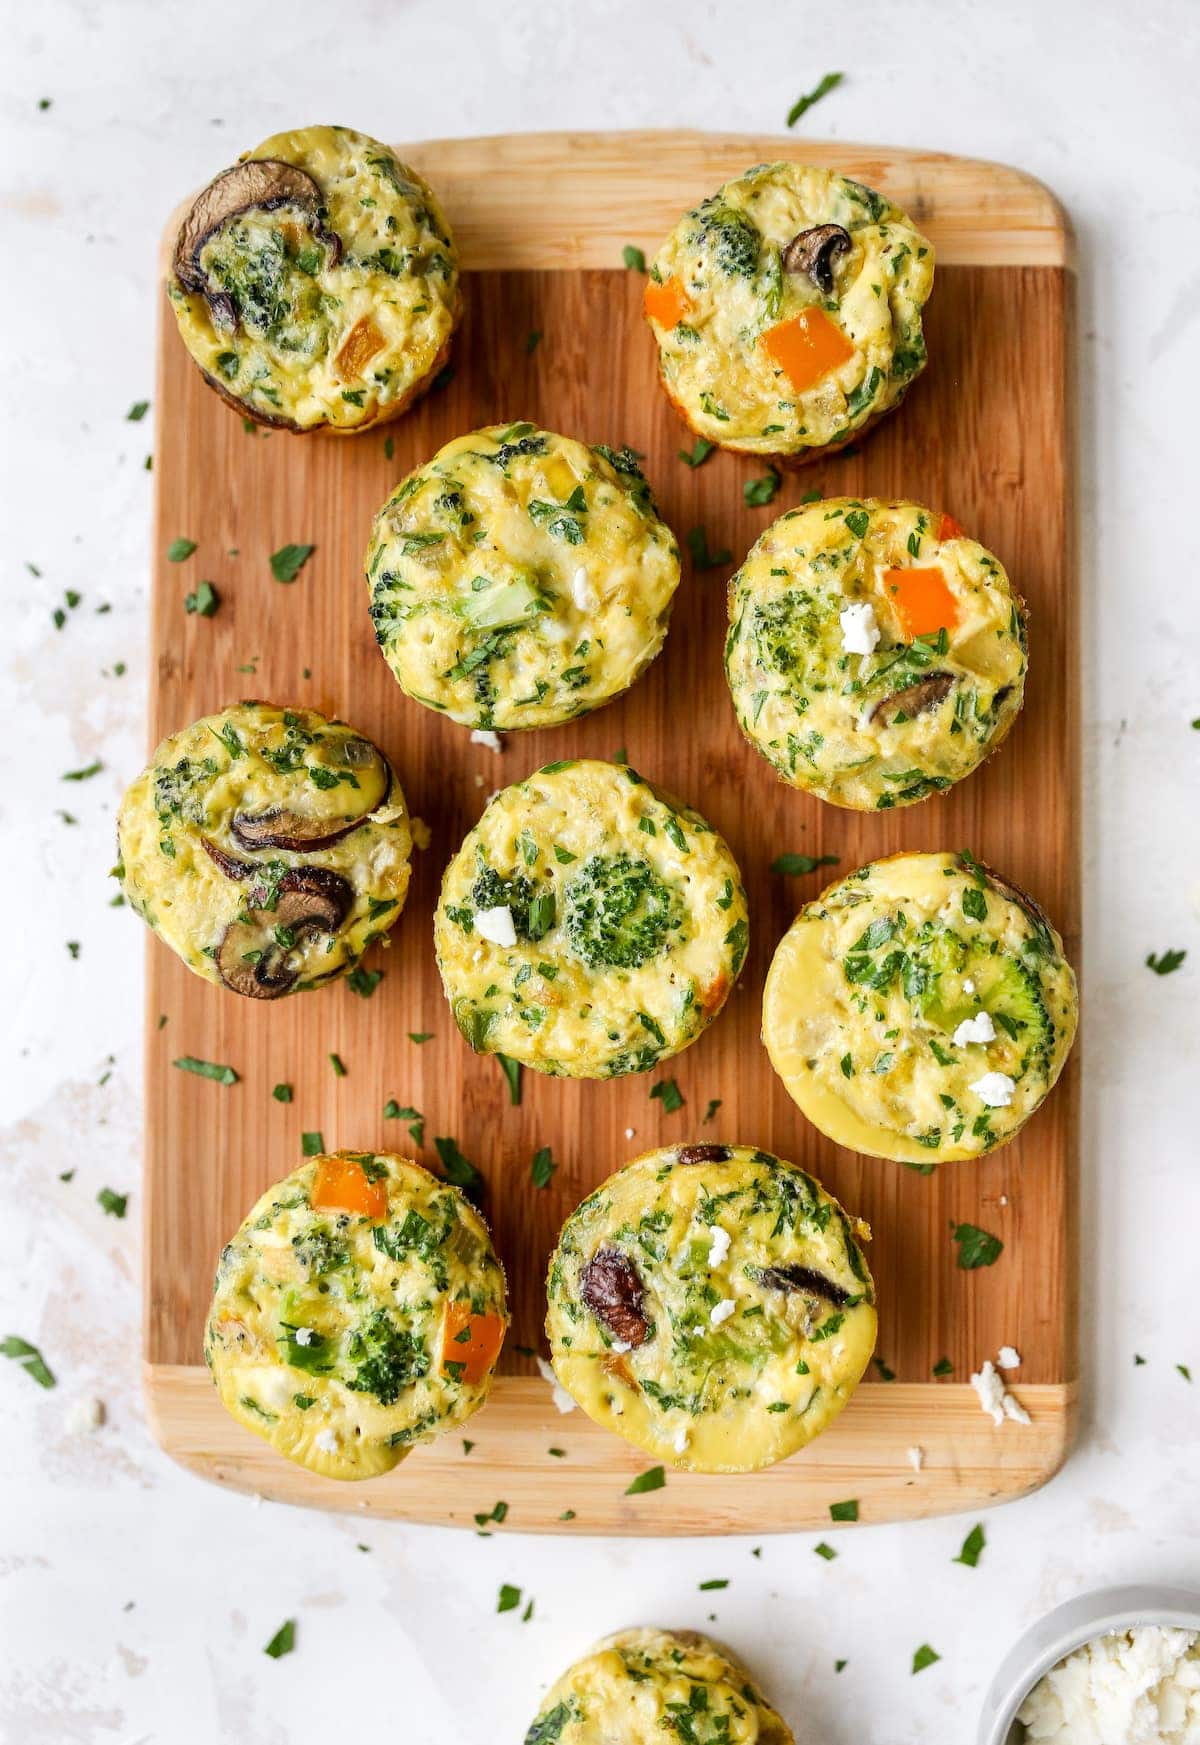 Healthy Baked Egg Muffins {Perfect for Meal Prep} - Eating Bird Food